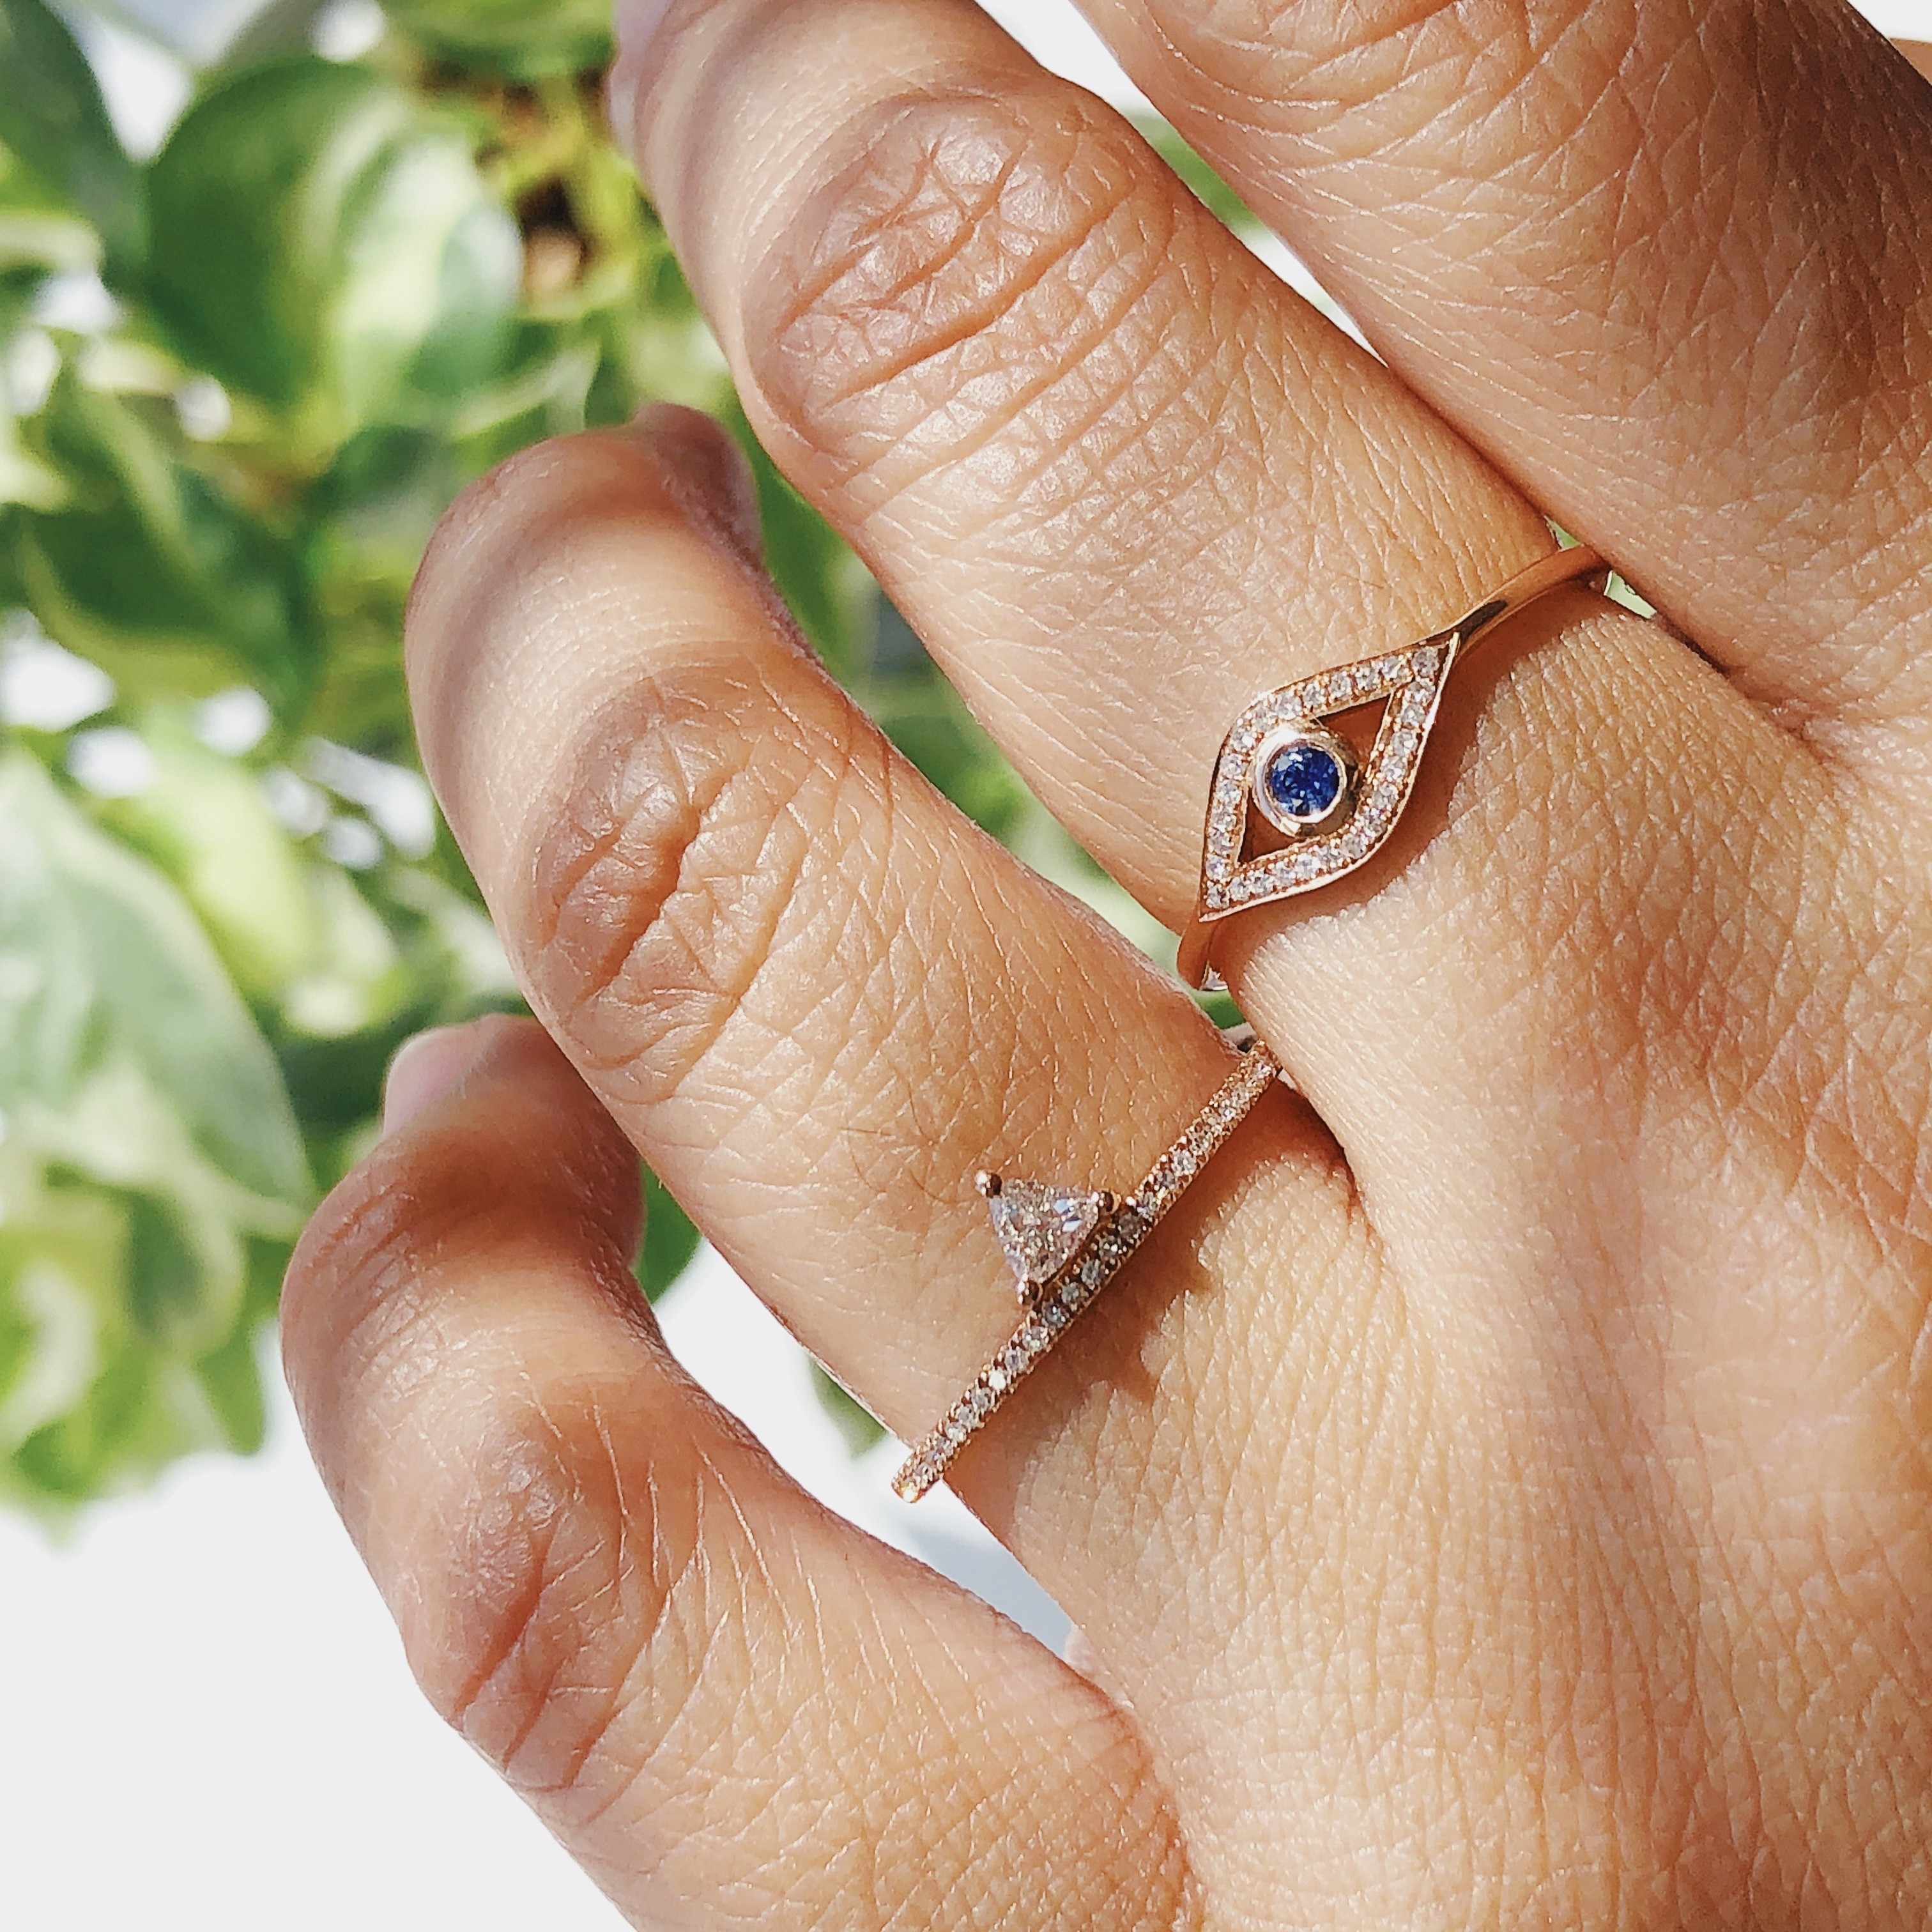 Voorman bibliotheek Ooit 14KT Yellow Gold Evil Eye Sapphire and Diamond Ring - Rings - Shop by Style  - SHOP